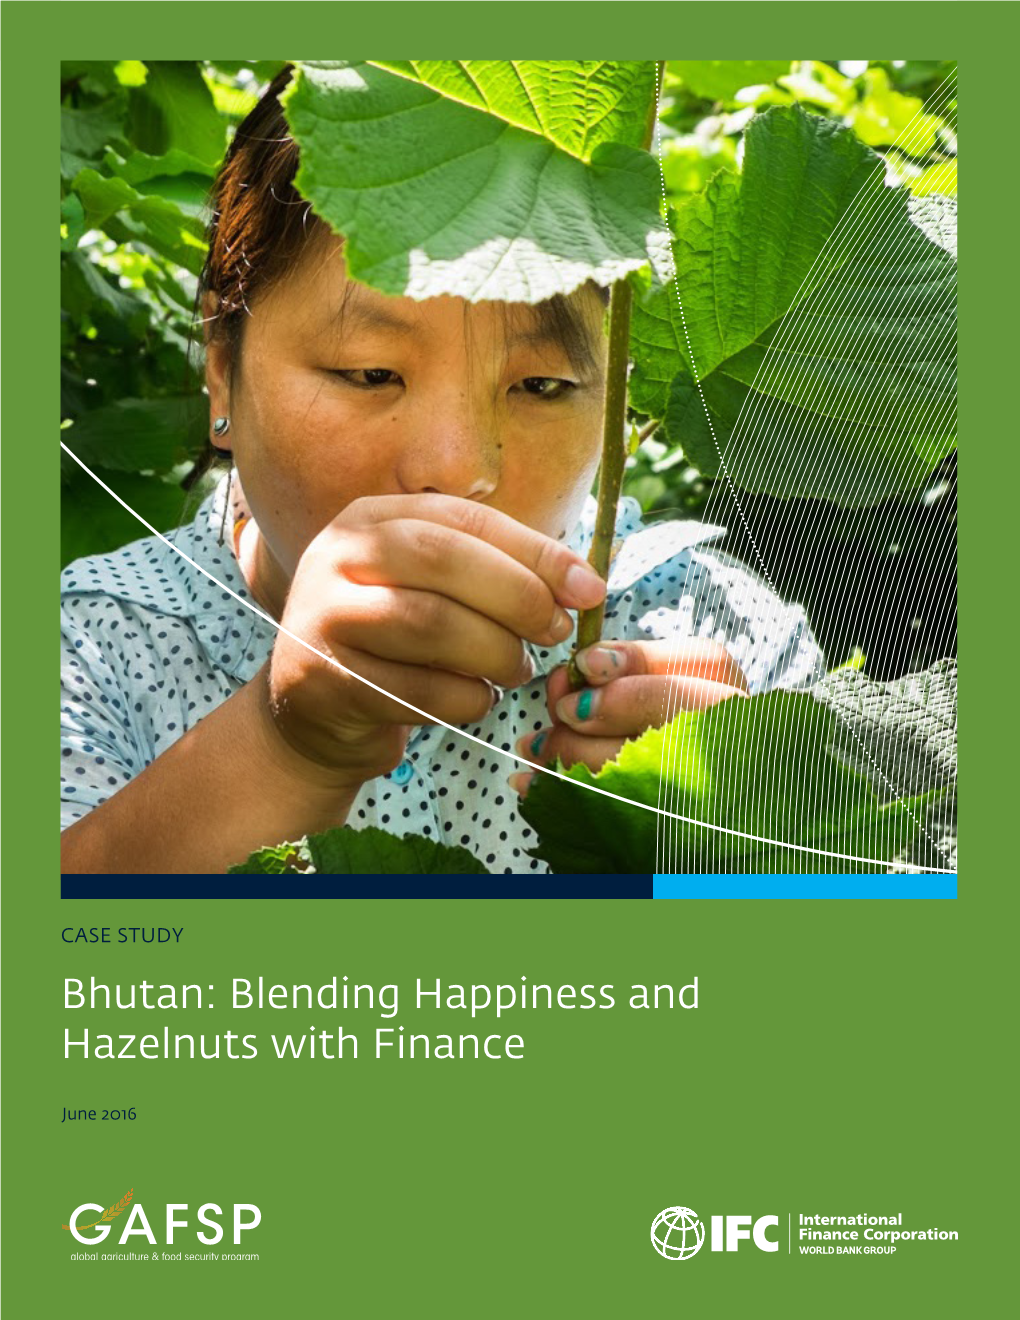 Bhutan: Blending Happiness and Hazelnuts with Finance